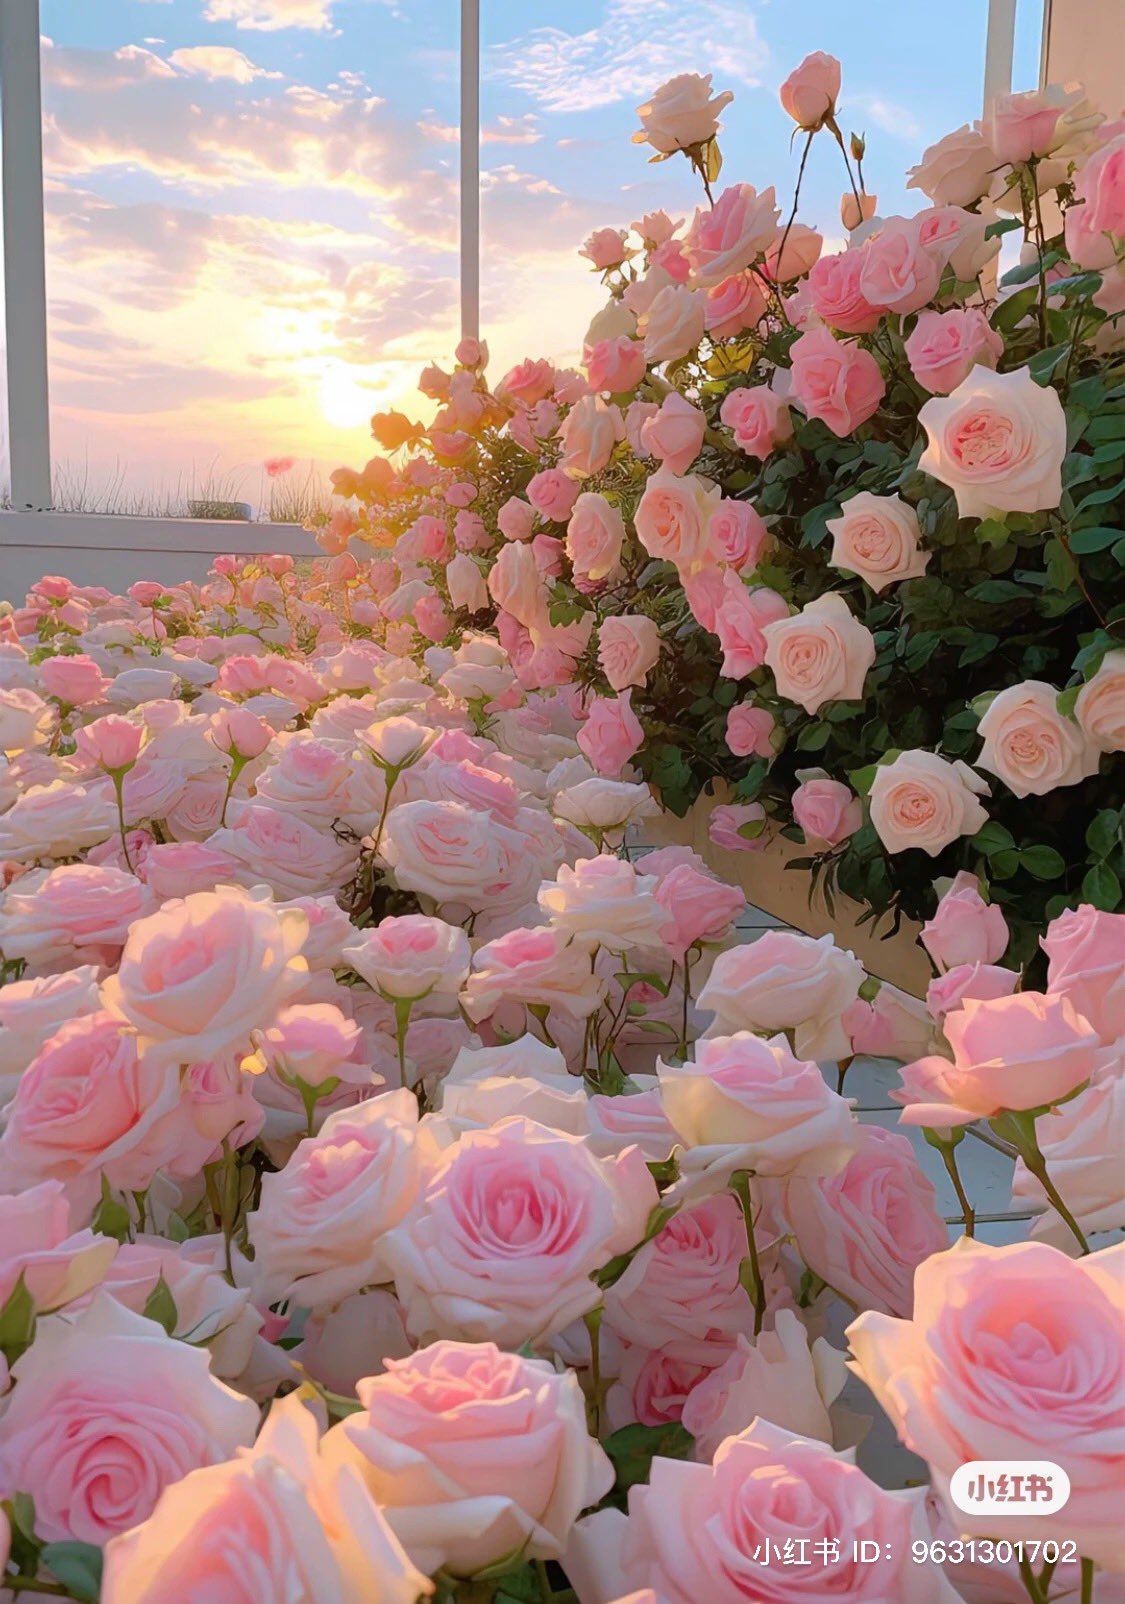 Pink roses with a sunset in the background - Garden